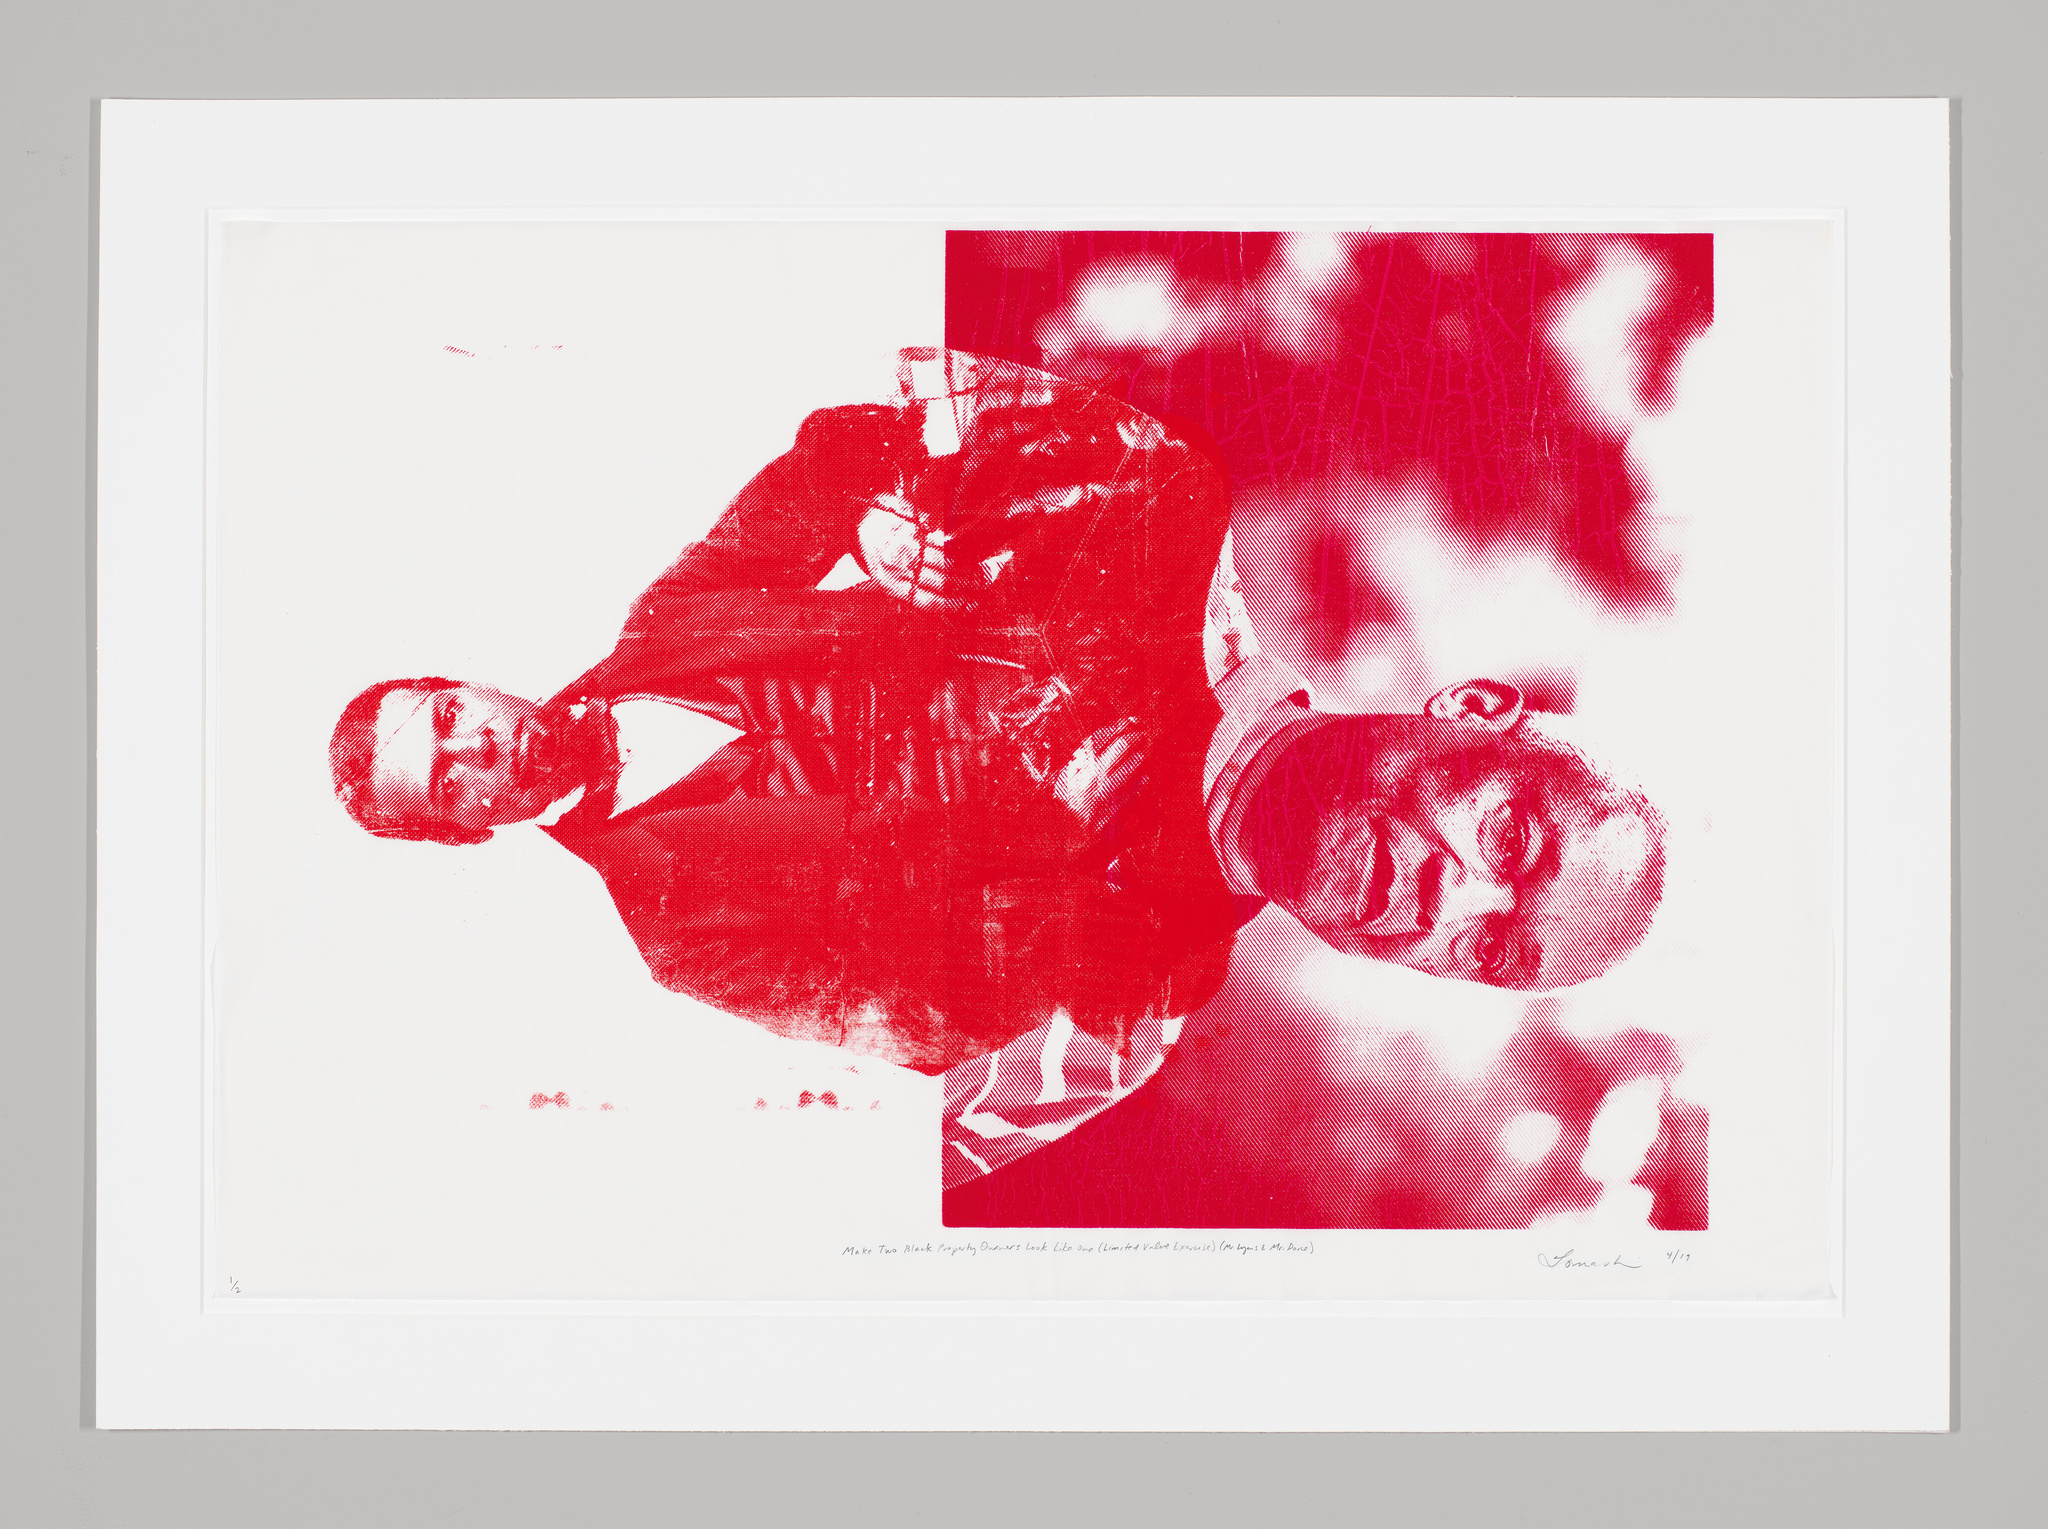 A pinkish-red print of two Black men’s upper bodies, merged like kings on a playing card and oriented sideways